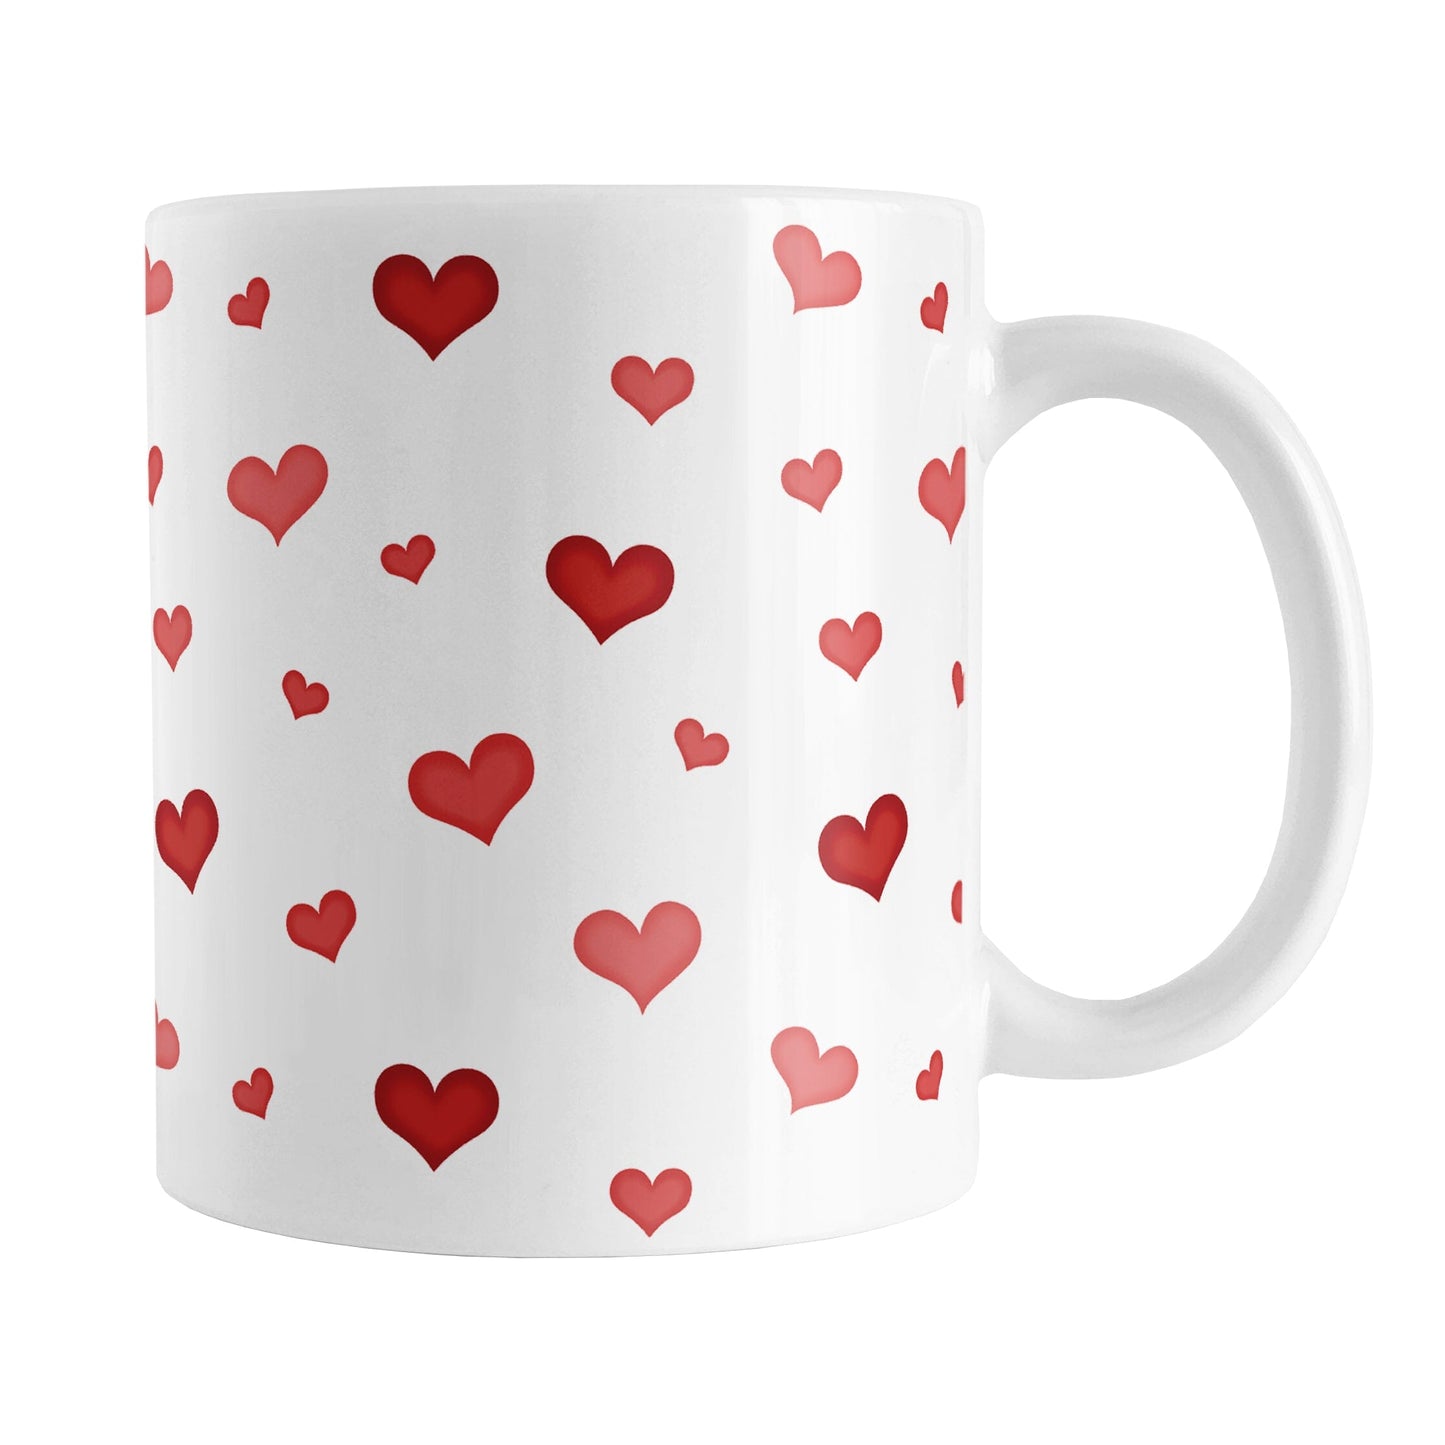 Dainty Cute Red Hearts Mug (11oz) at Amy's Coffee Mugs. A ceramic coffee mug designed with a print of cute and dainty hand-drawn re hearts in different shades of red in a pattern that wraps around the mug up to the handle. 